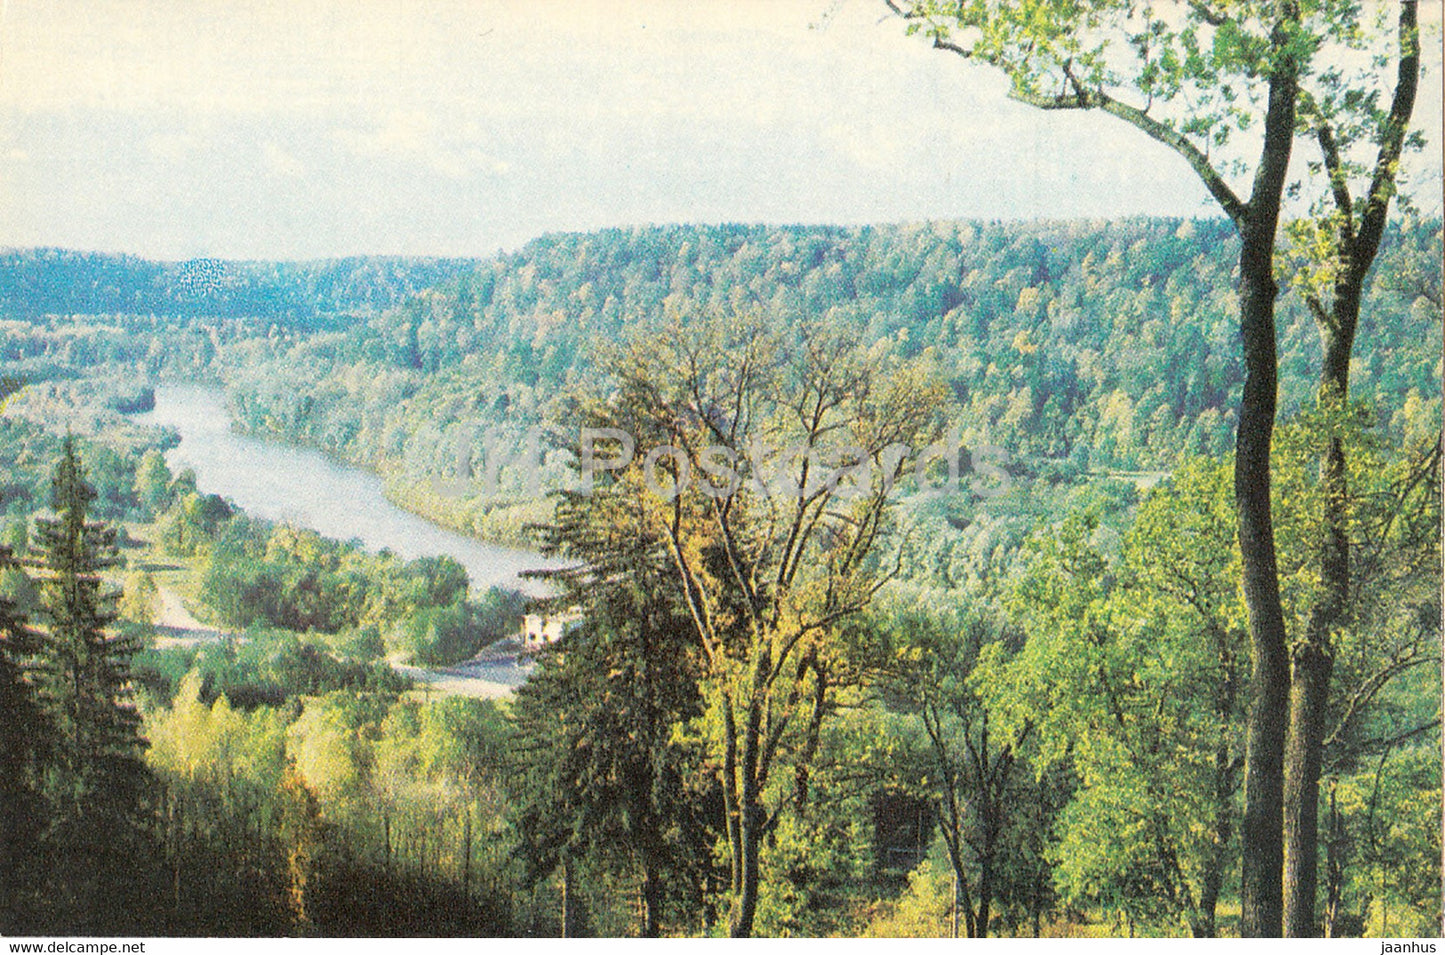 The Gauja National Park - View on the Gauja from Launaga Rock - 1976 - Latvia USSR - unused - JH Postcards